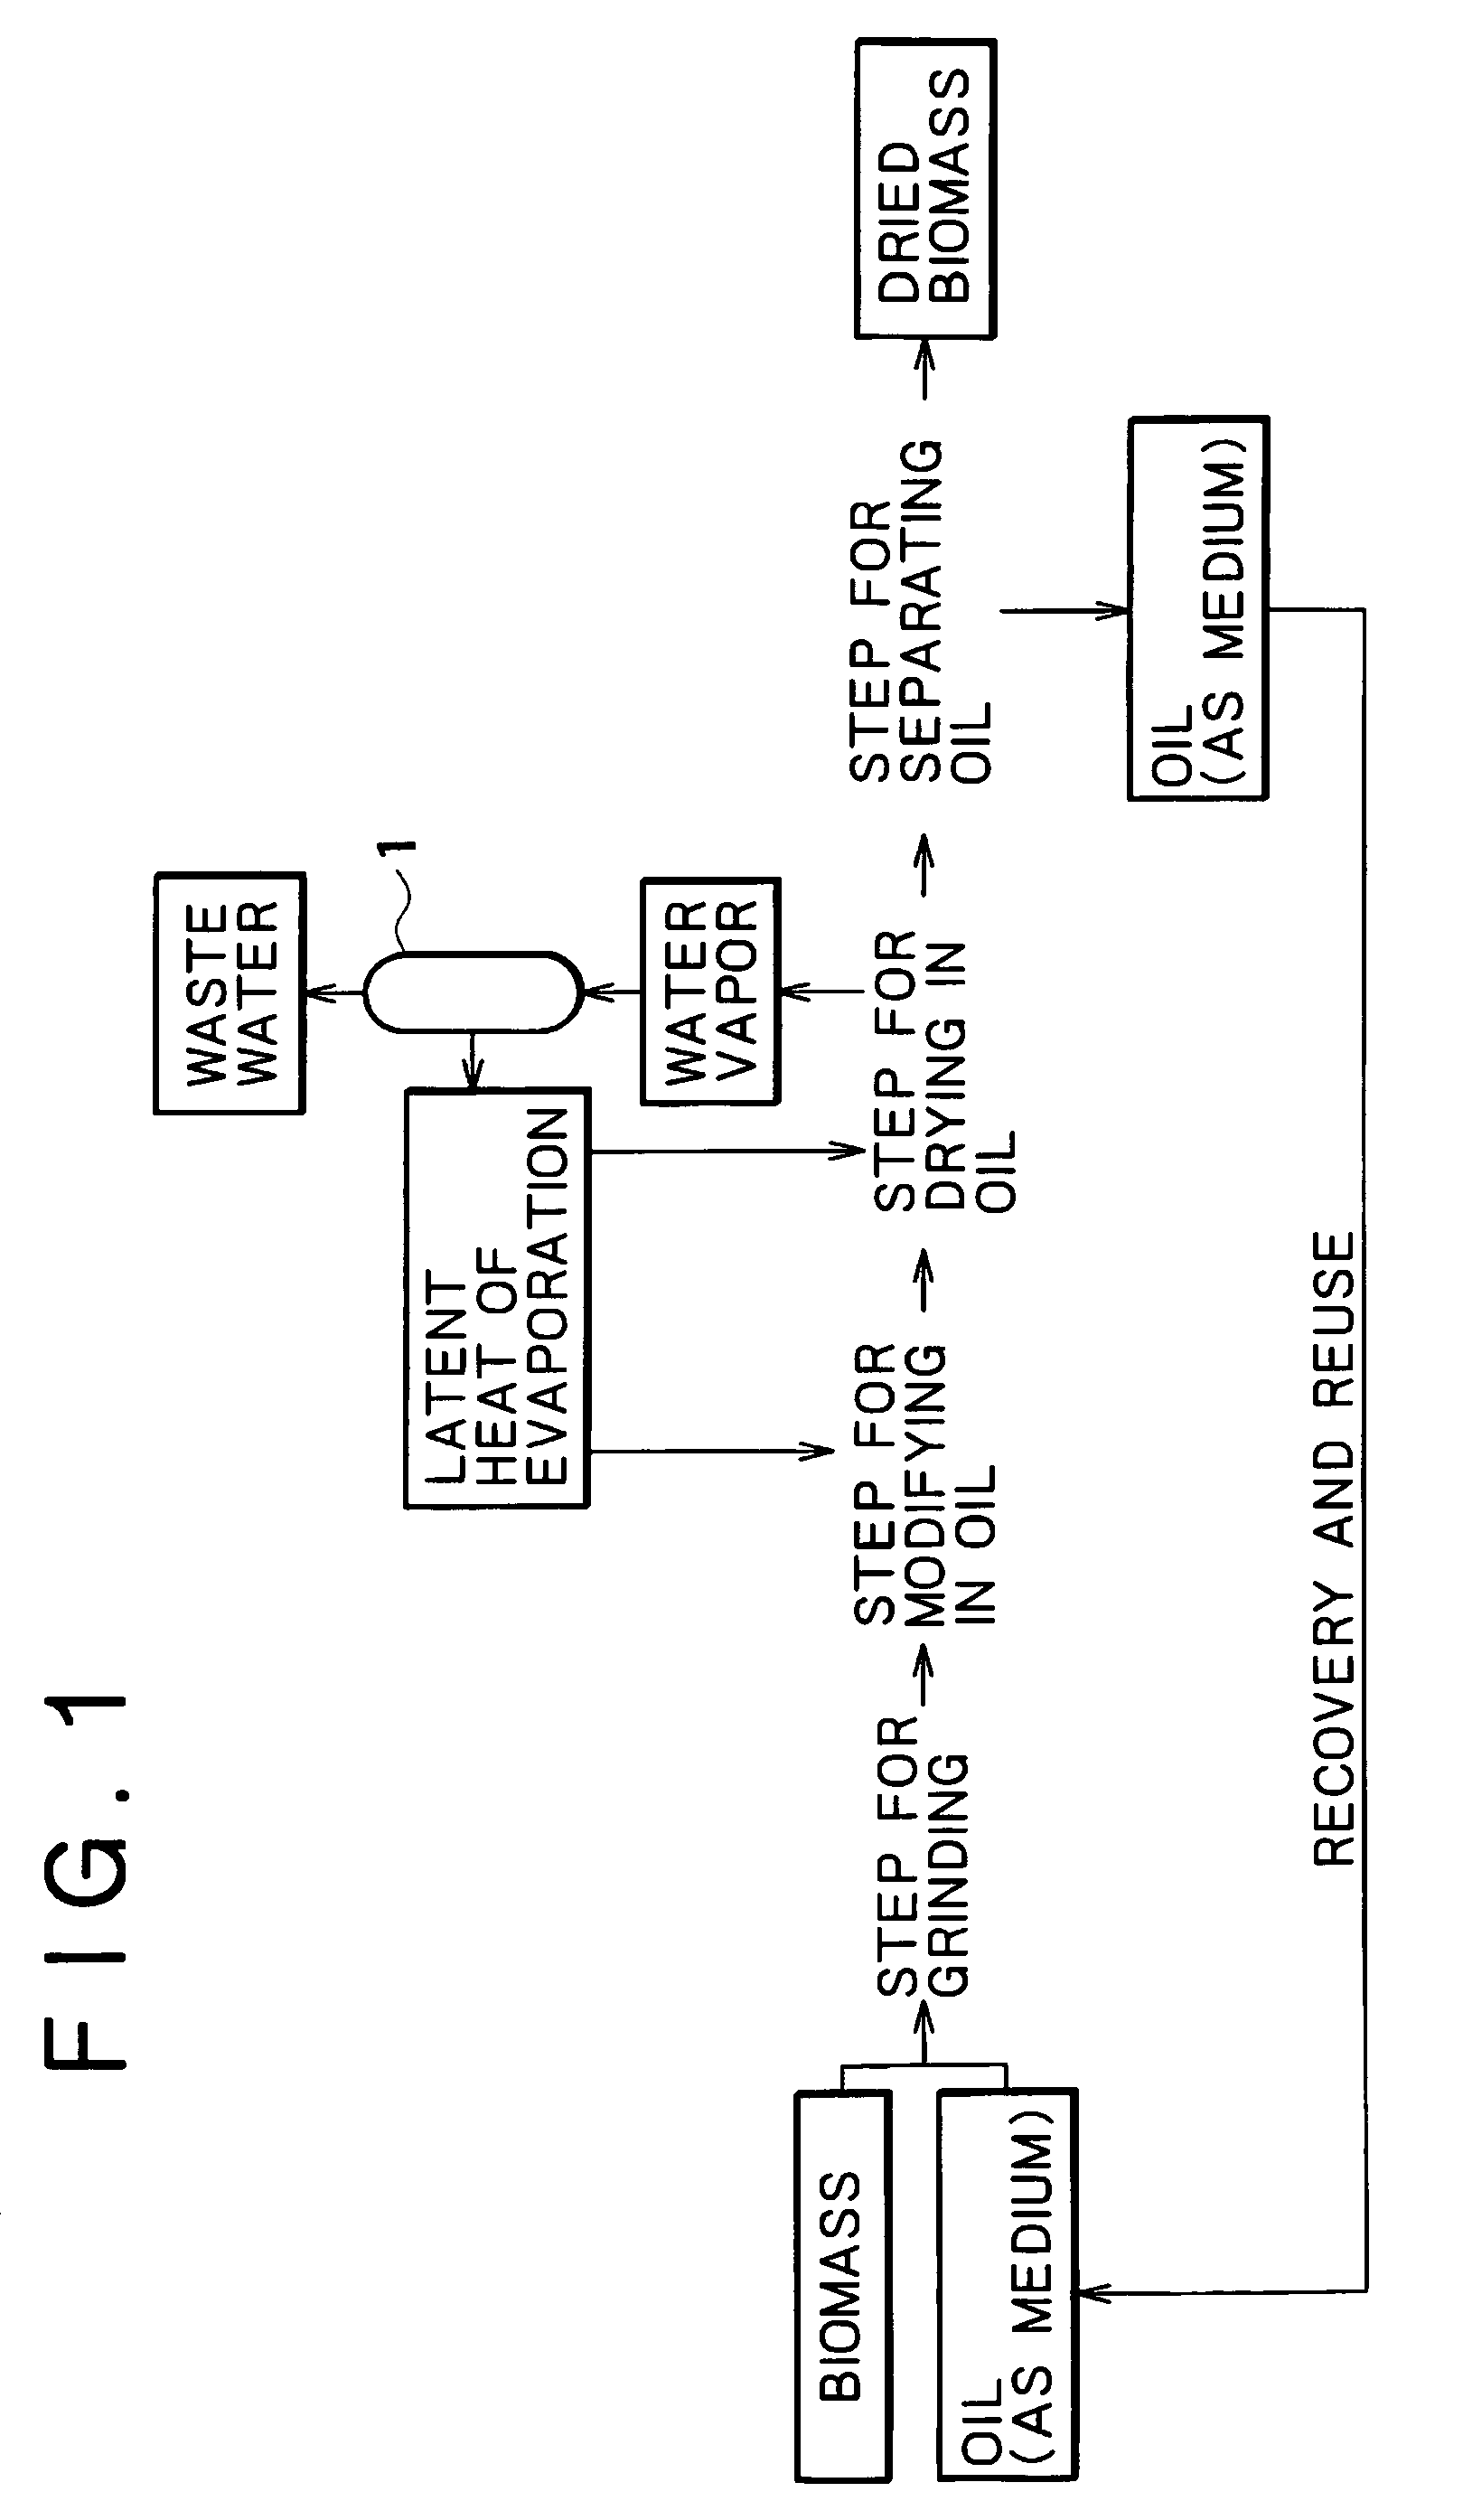 Method for drying plant-derived biomass and method for producing biomass fuel